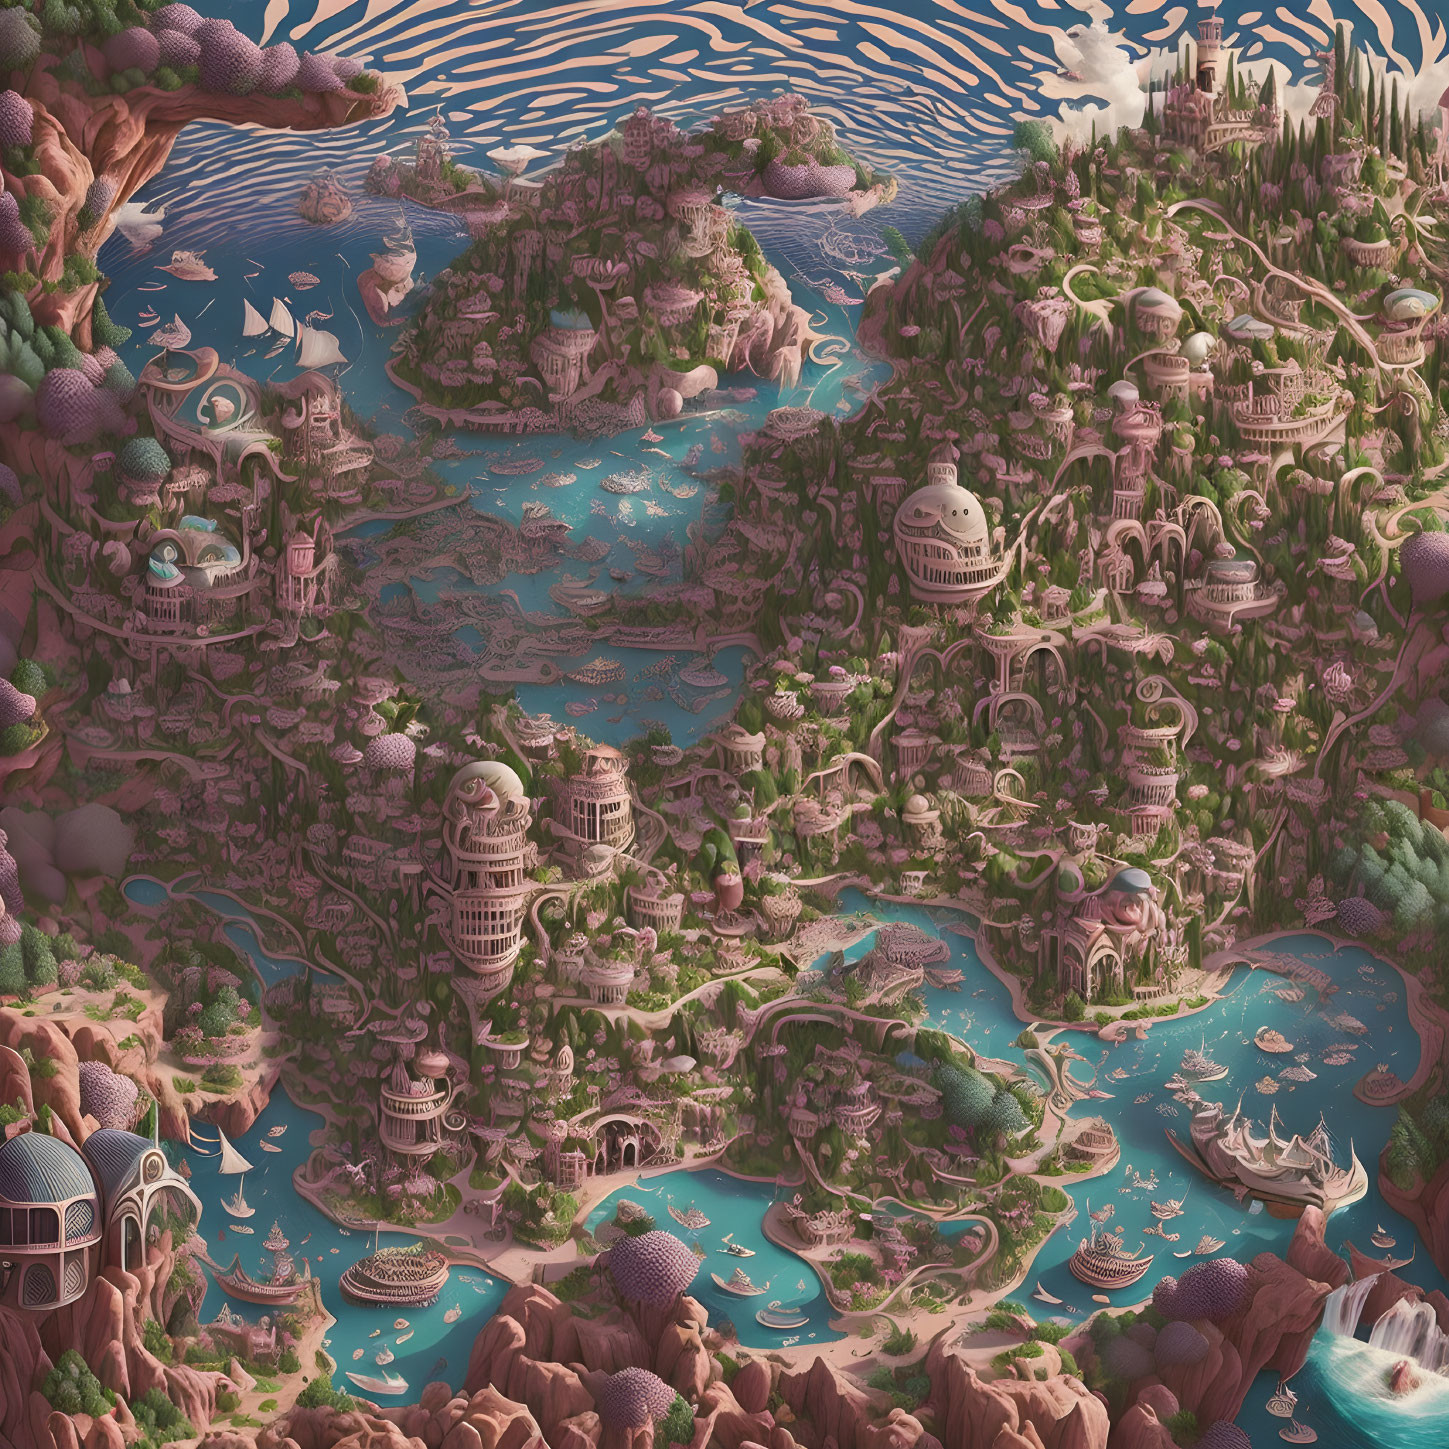 Whimsical landscape with pink trees and intricate waterways